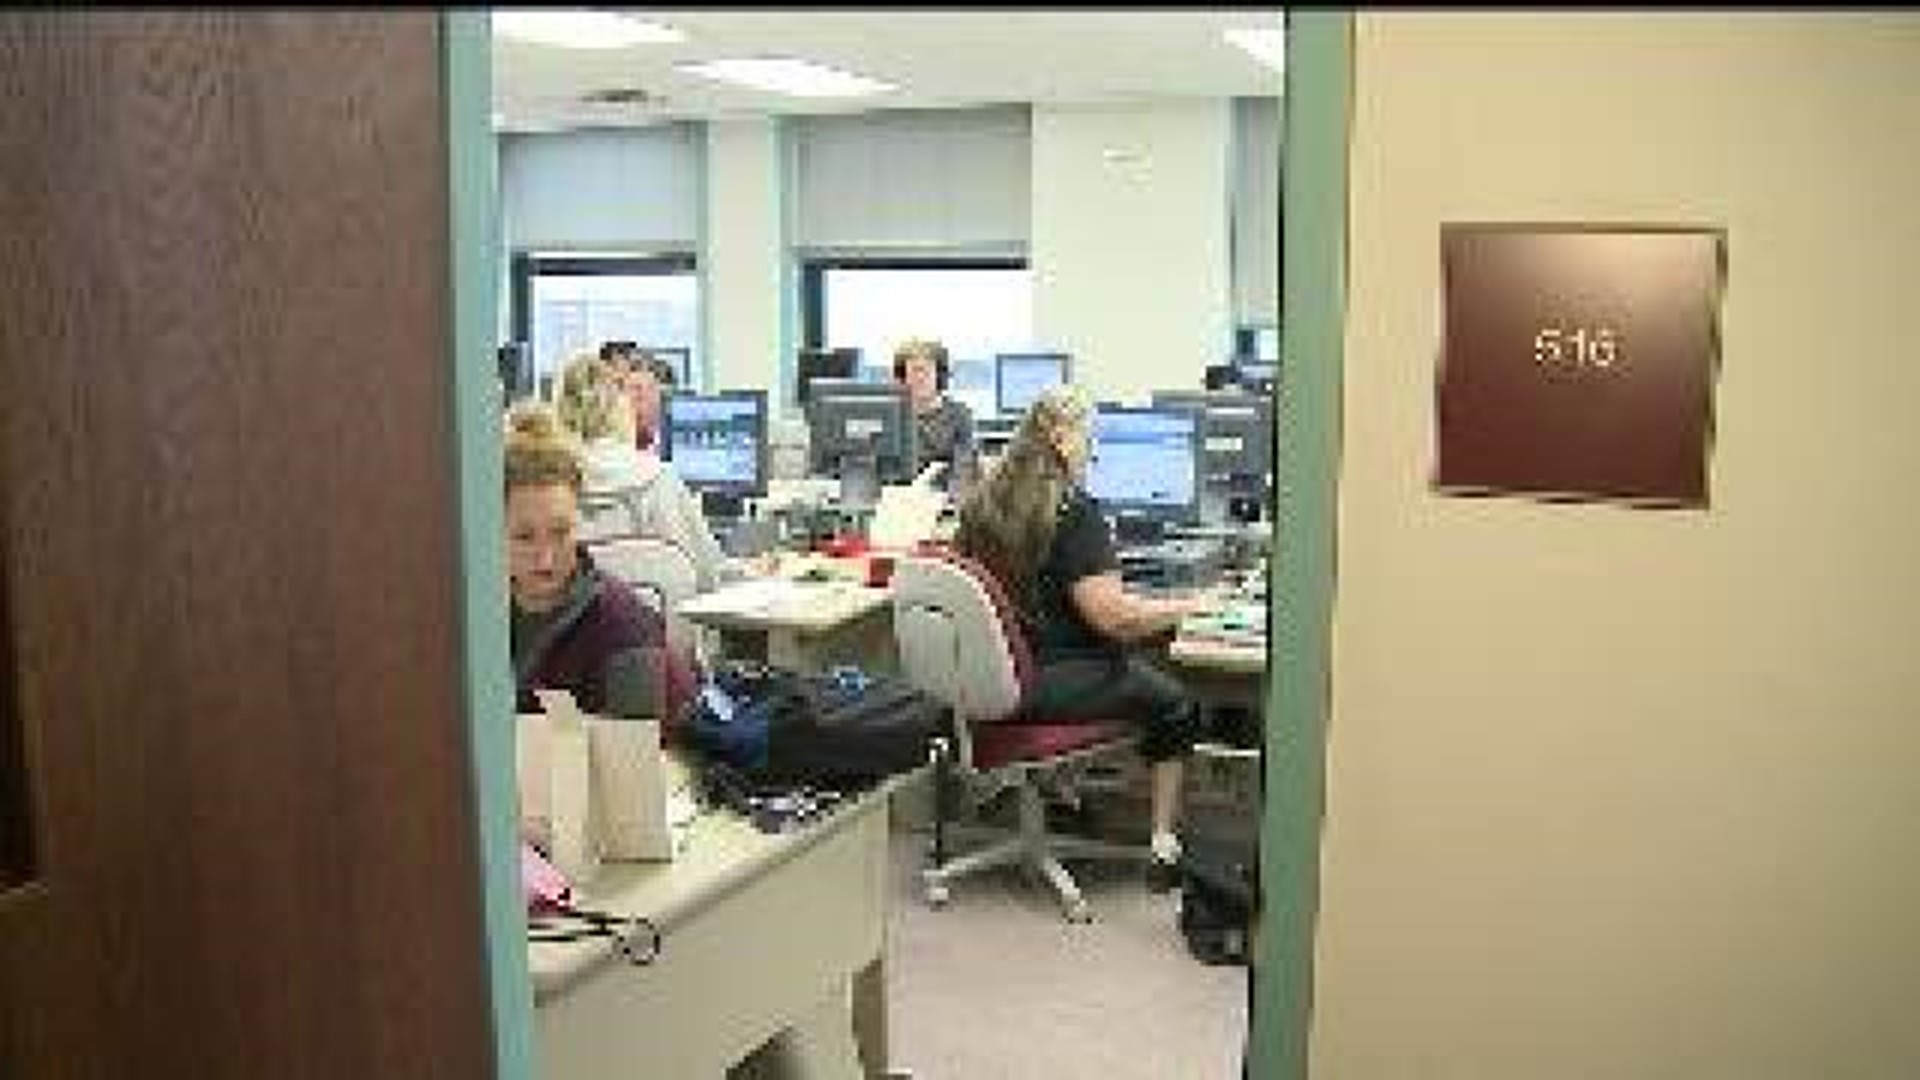 Retention Rate for Community Colleges Released